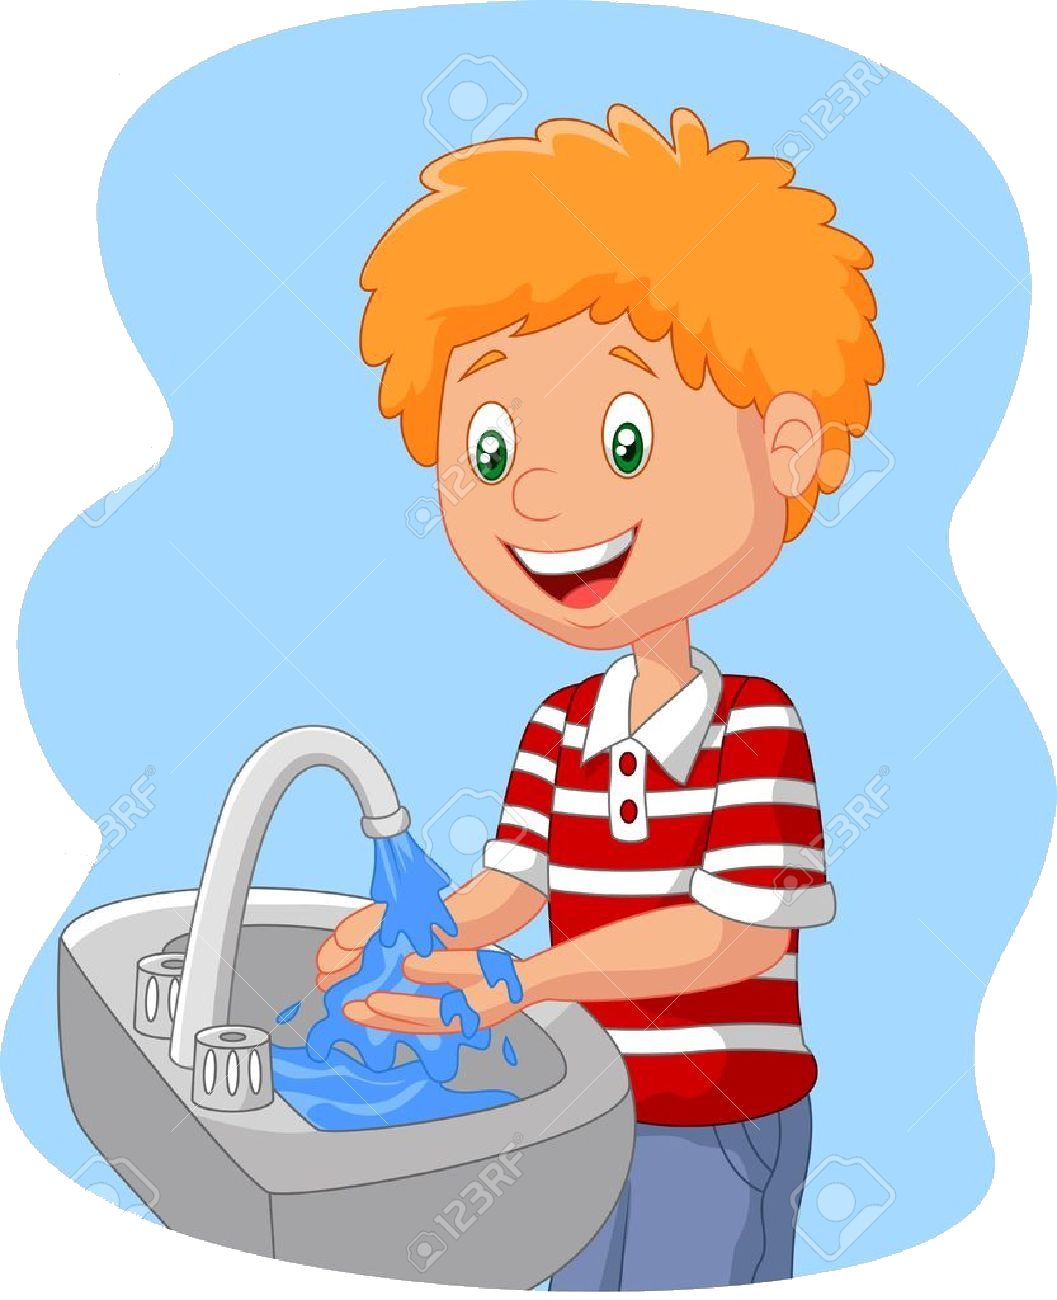 Hand Washing Clipart Free Download Transparent Png Cr - vrogue.co